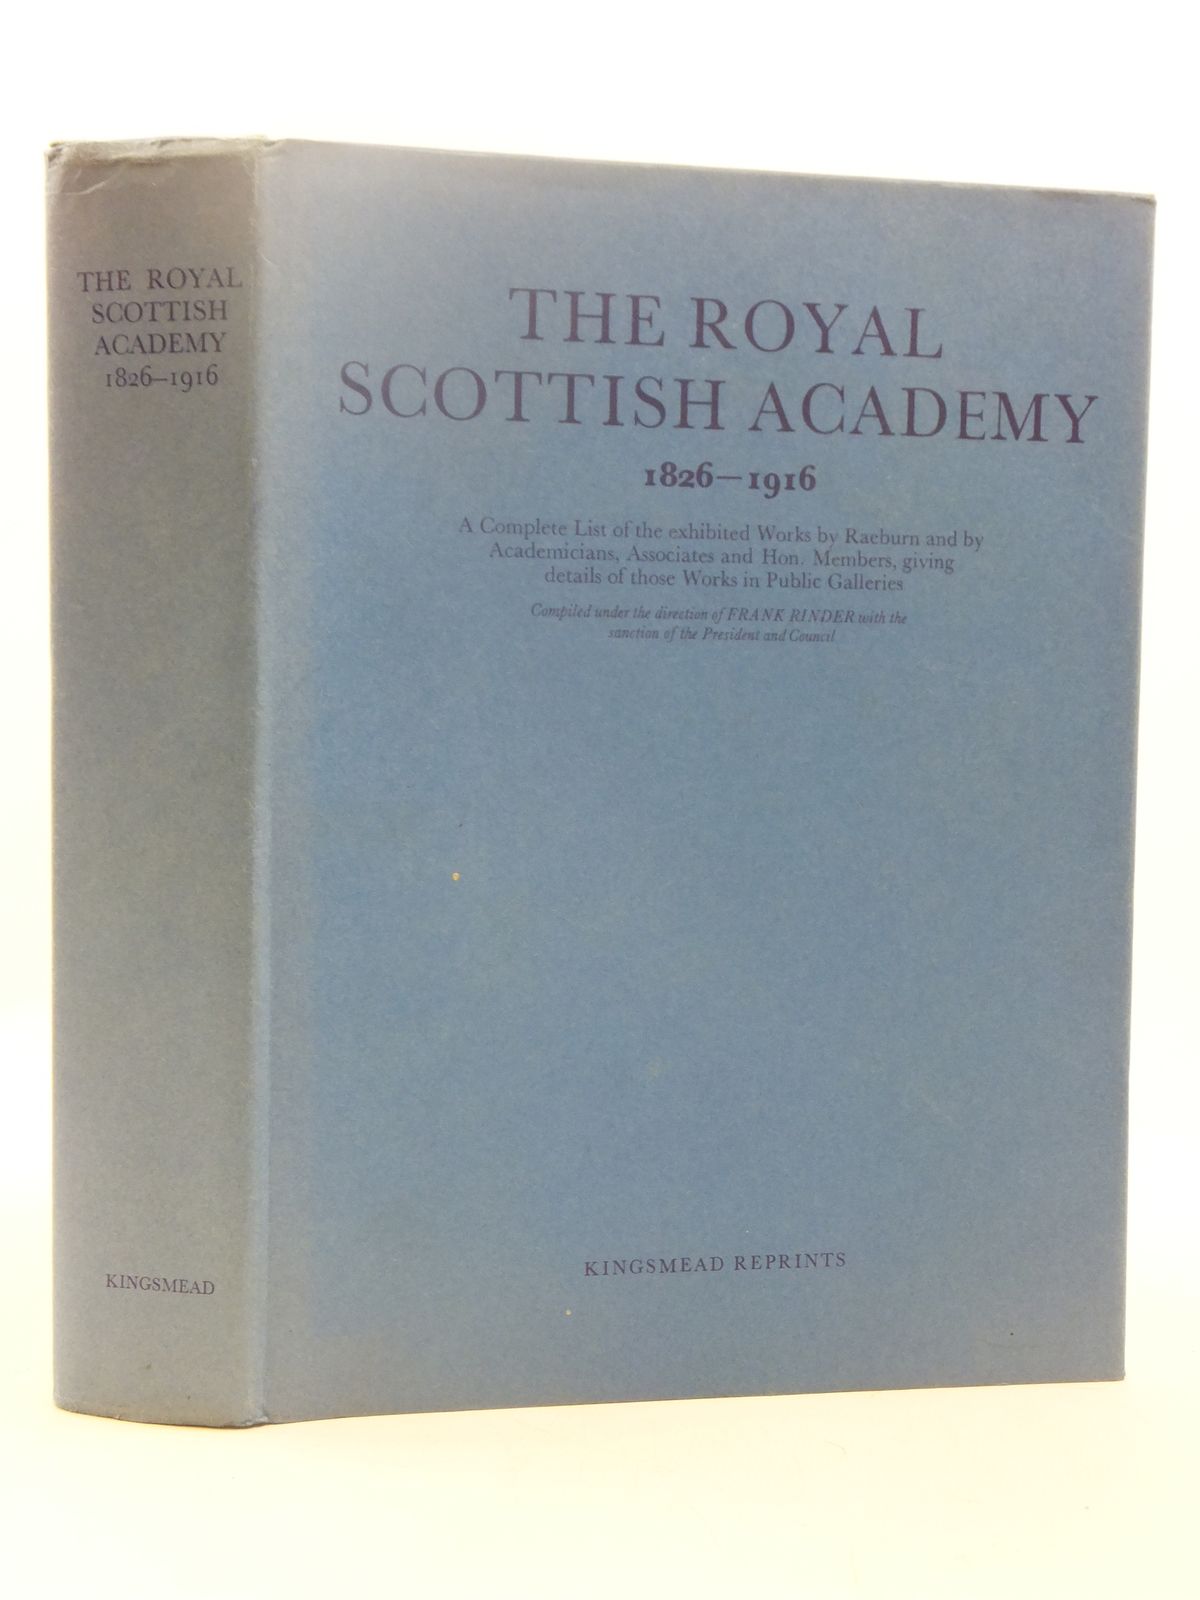 Photo of THE ROYAL SCOTTISH ACADEMY 1826-1916 written by Rinder, Frank published by Kingsmead Reprints (STOCK CODE: 1605156)  for sale by Stella & Rose's Books